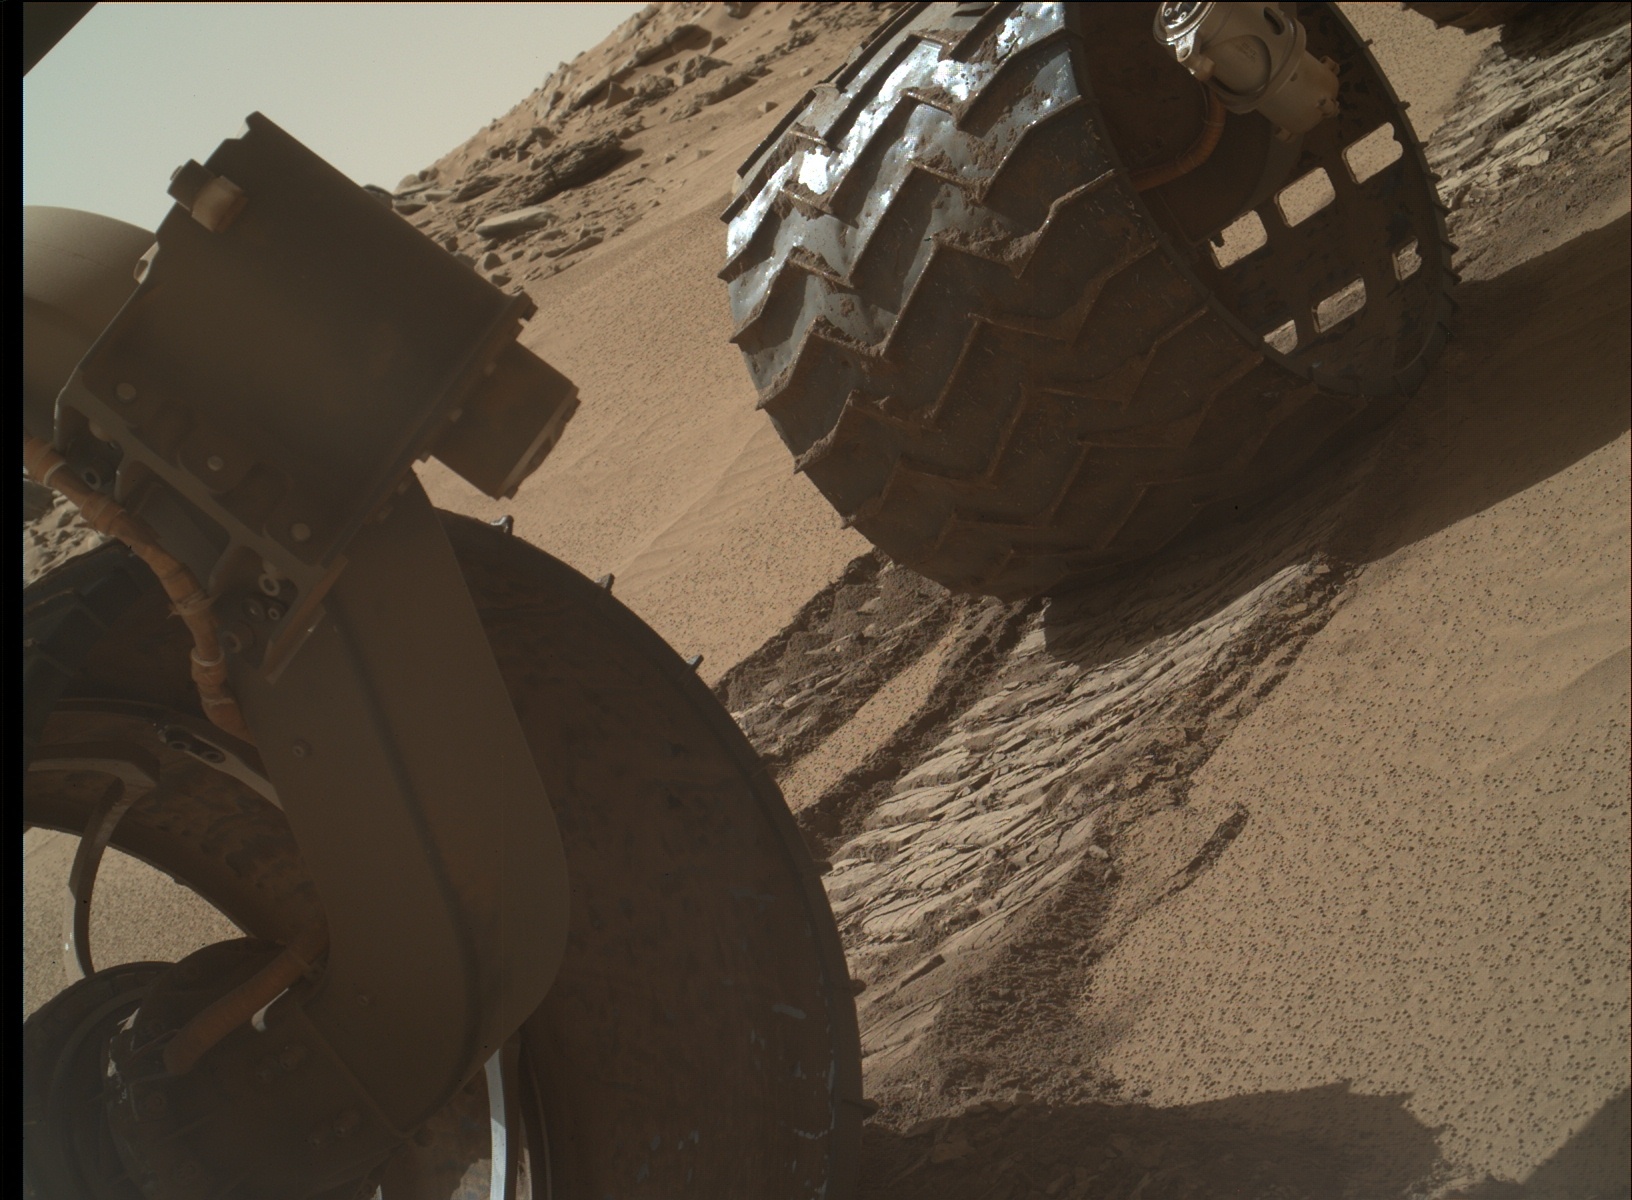 Nasa's Mars rover Curiosity acquired this image using its Mars Hand Lens Imager (MAHLI) on Sol 532, at drive 196, site number 26